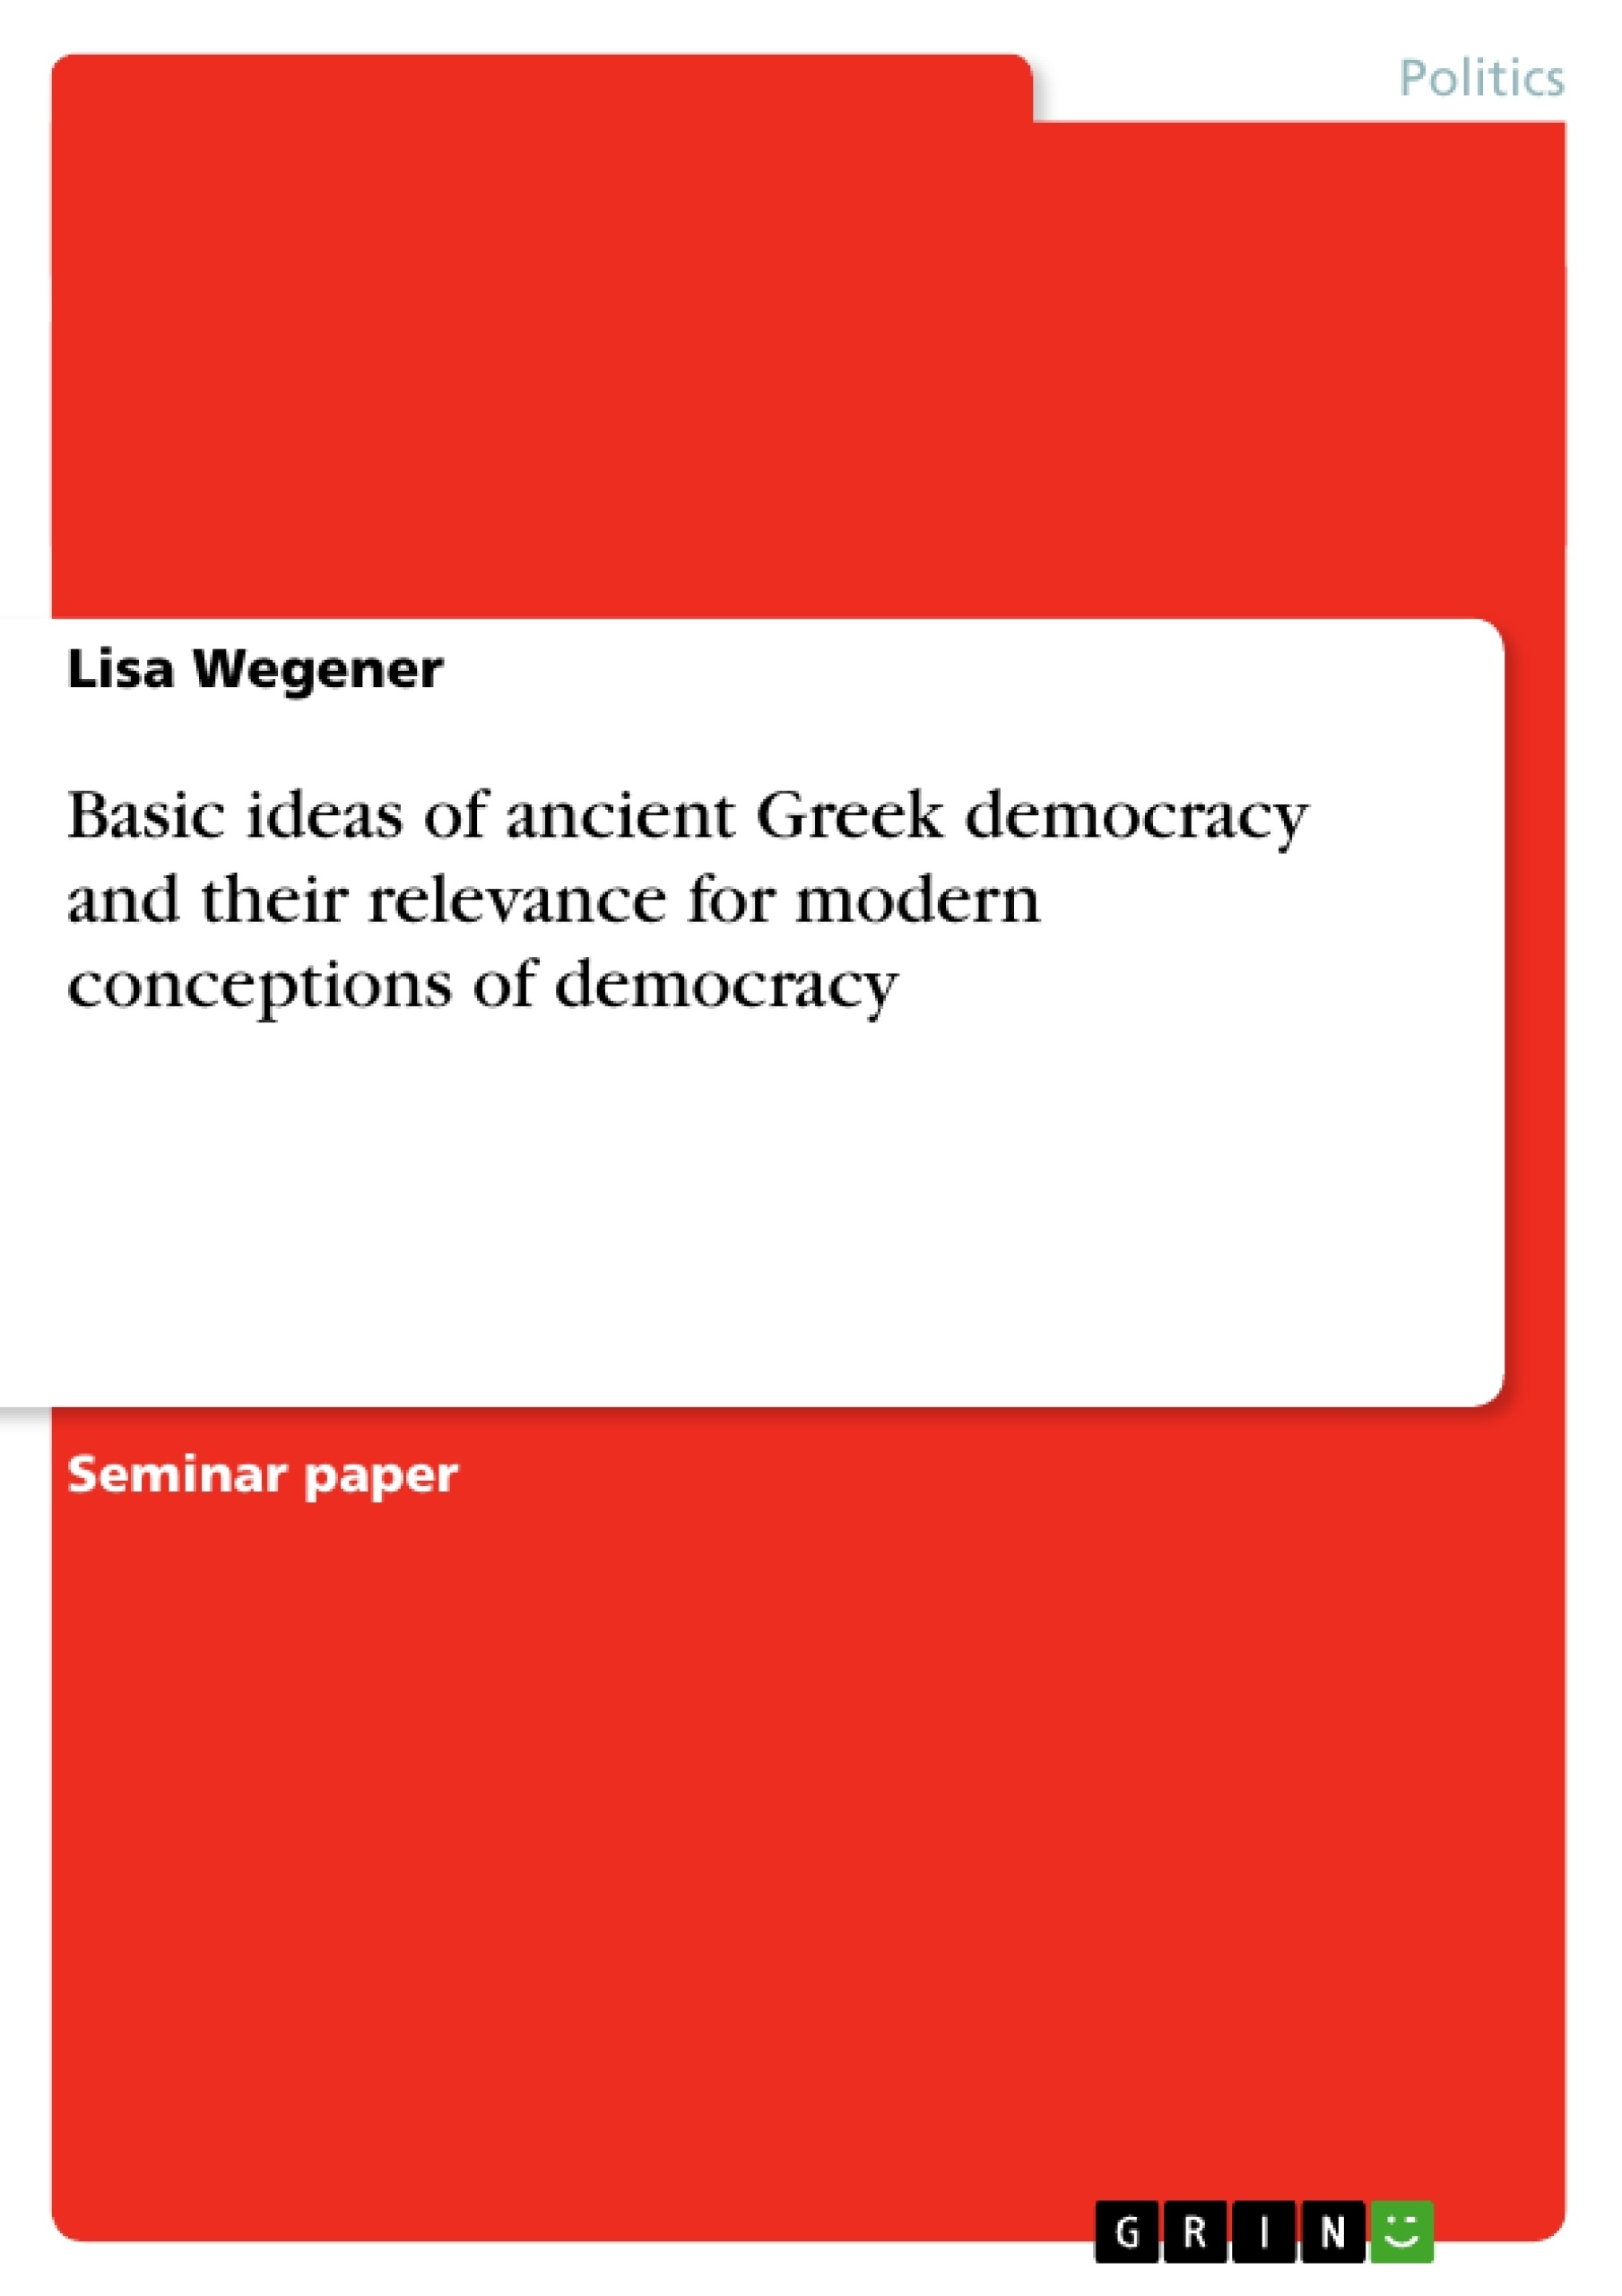 Título: Basic ideas of ancient Greek democracy and their relevance for modern conceptions of democracy